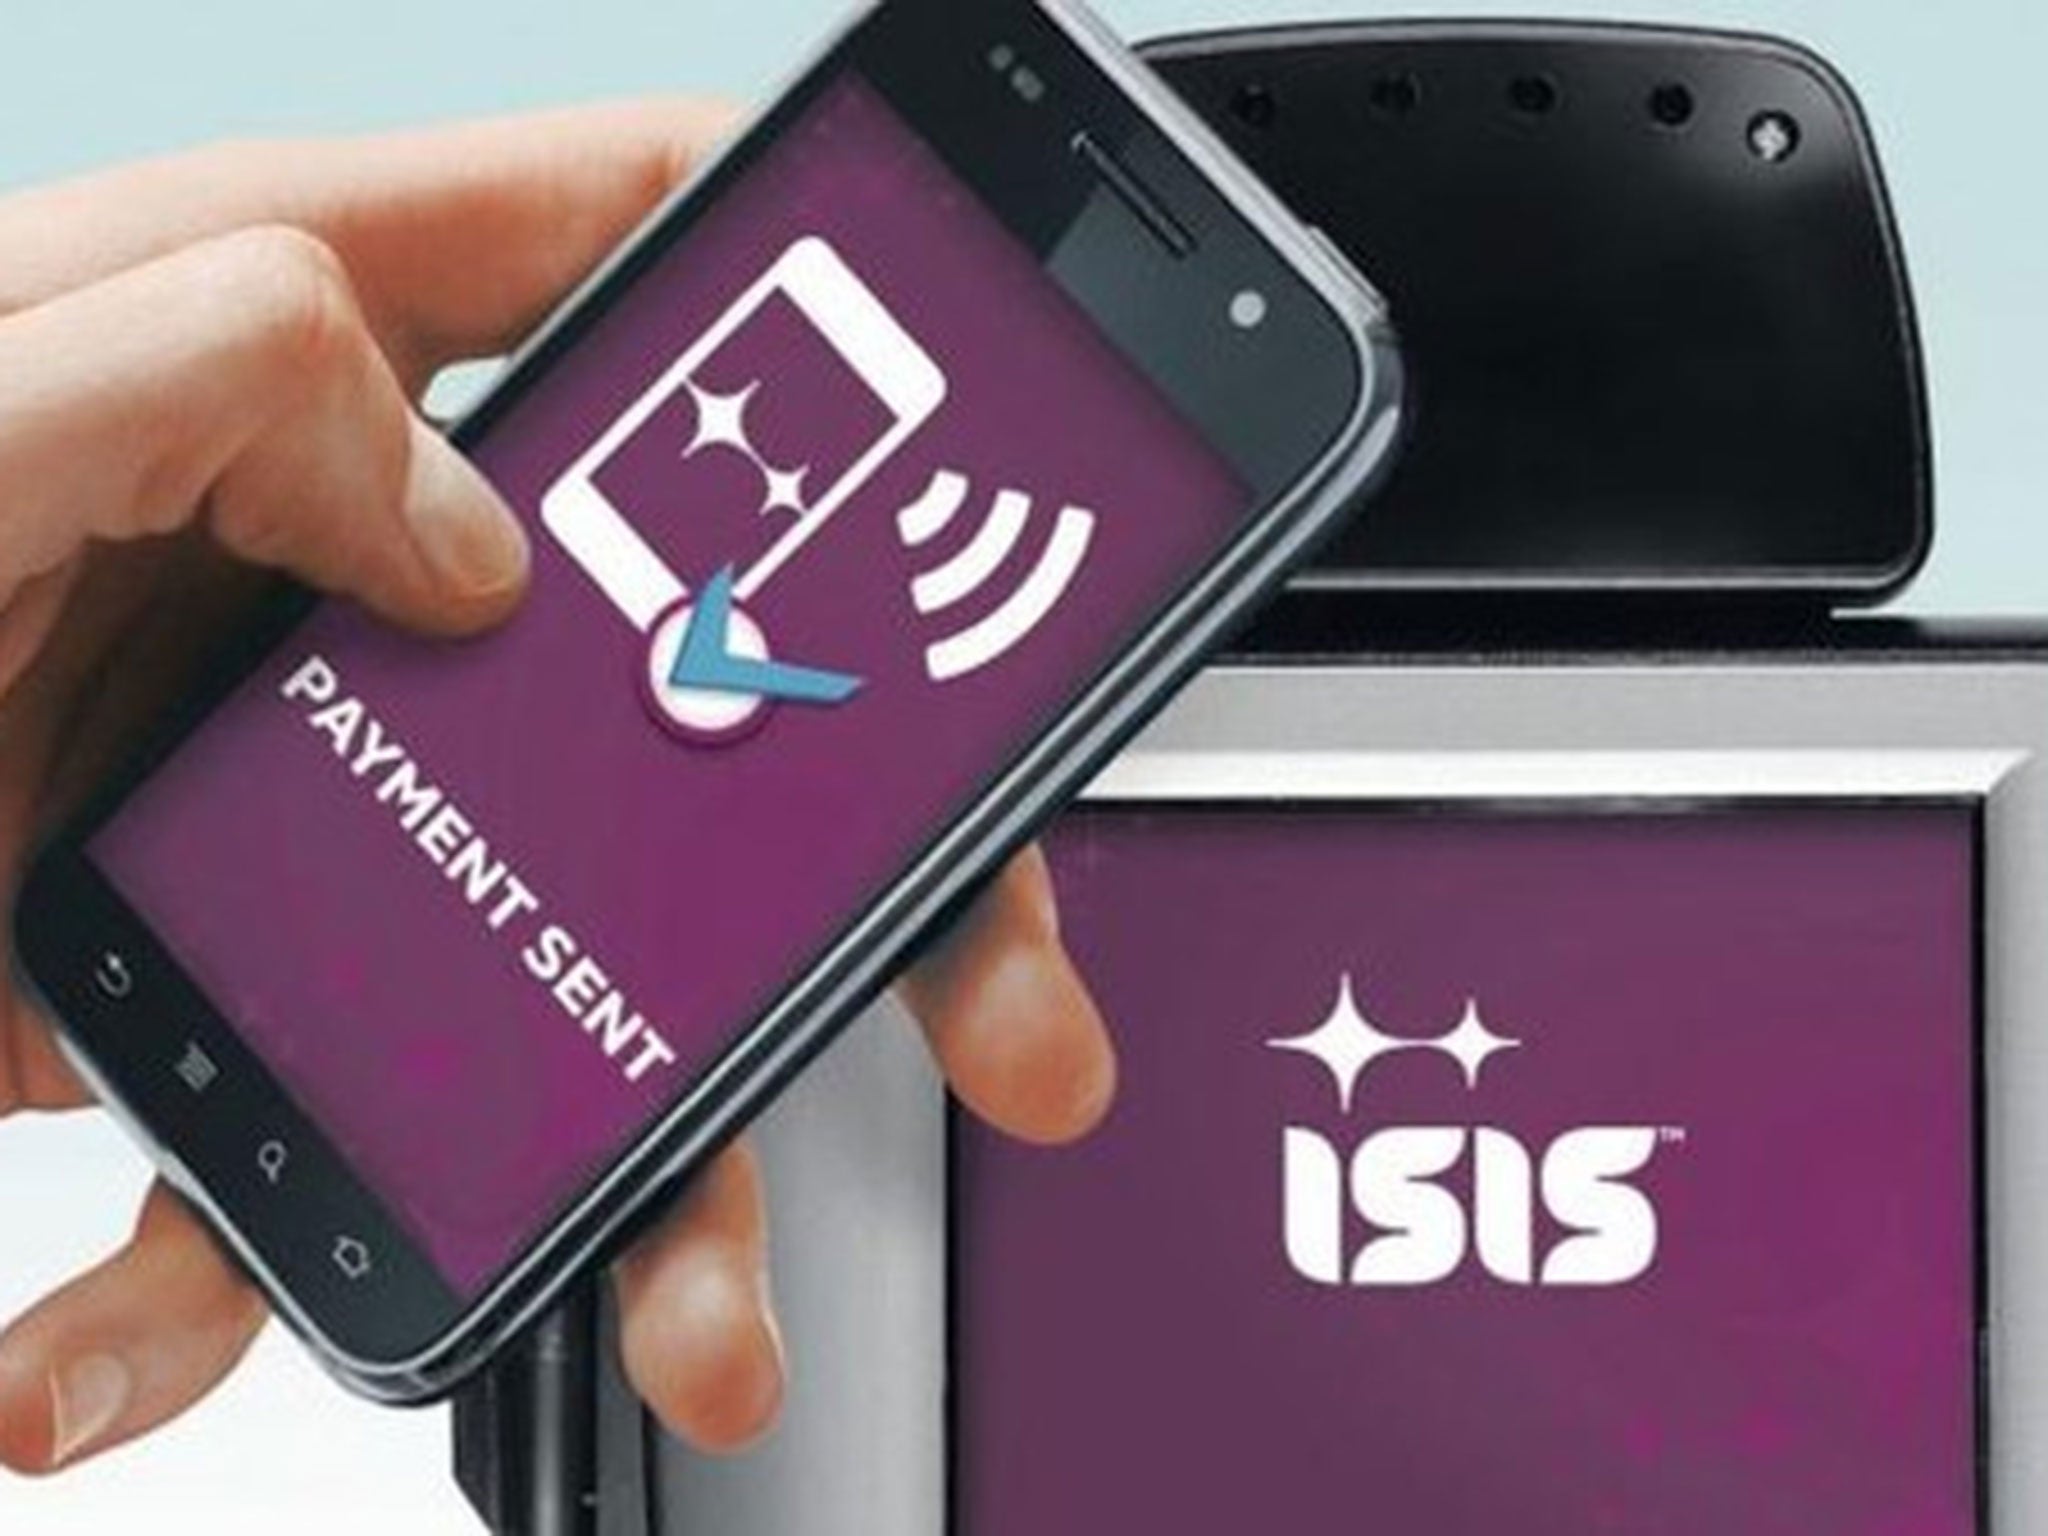 Isis Wallet, a mobile wallet app, changed its name to Softcard earlier this year